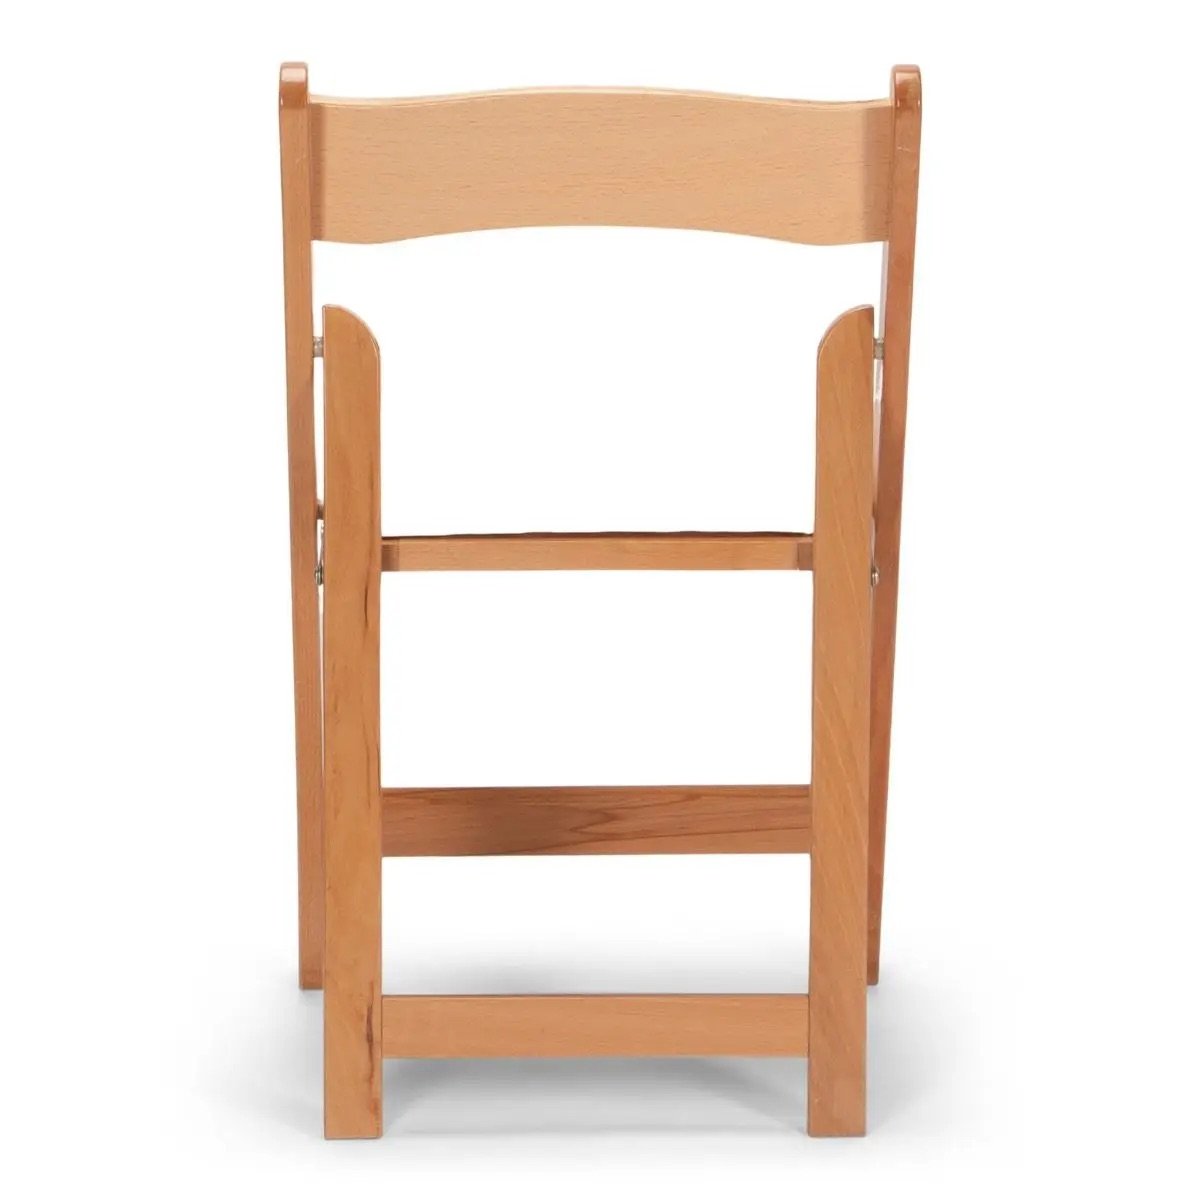 natural-wood-folding-chair-with-white-seat-hughes-event-rentals-charleston-sc5.jpeg